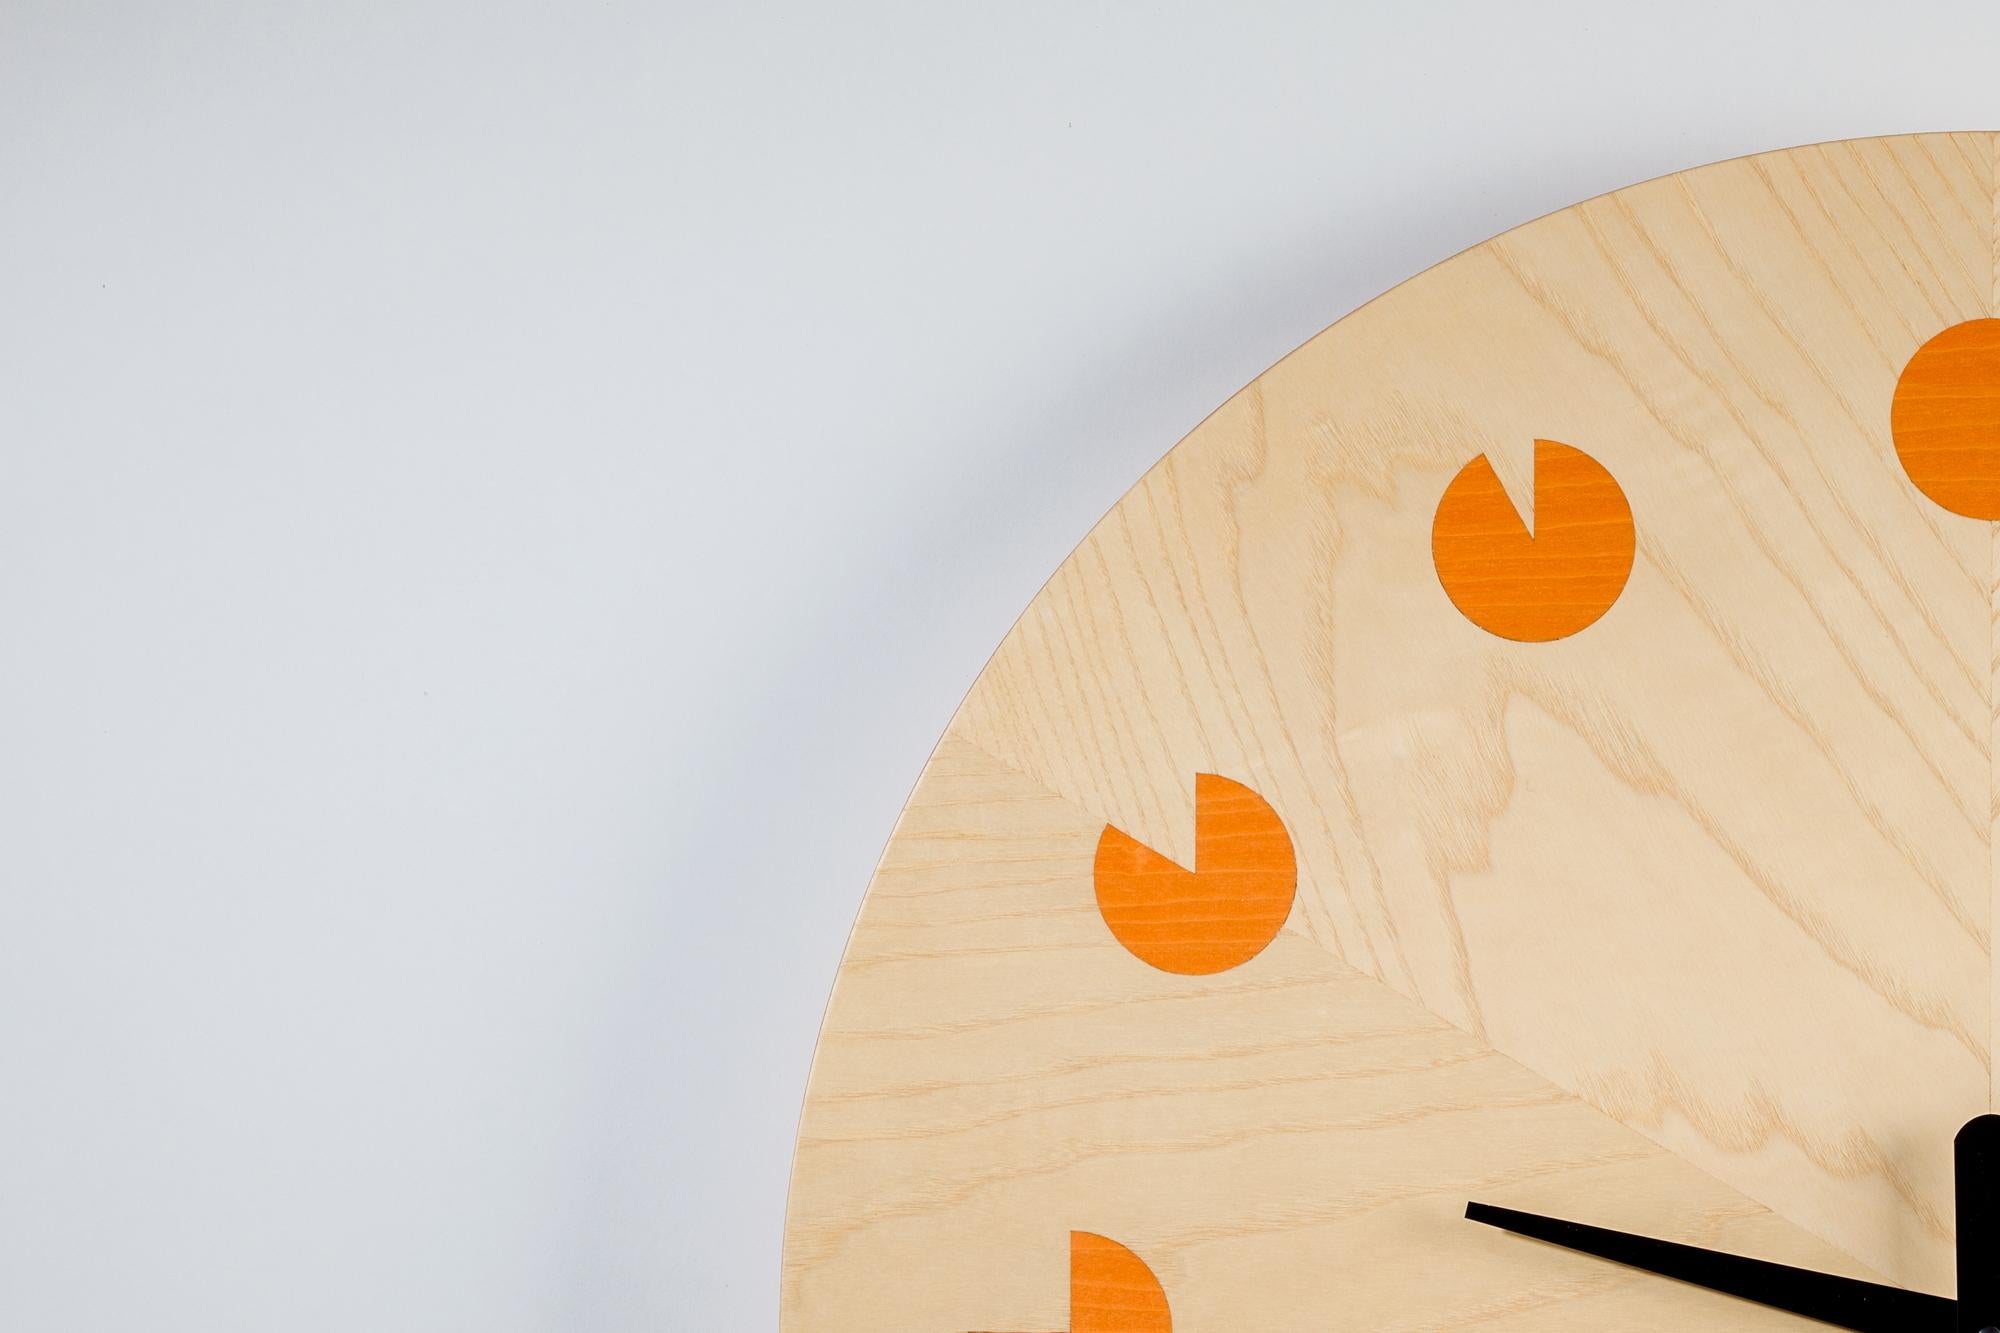 Transform your space with these enchanting wall clocks that effortlessly combine artistry and functionality. The clocks boast a captivating design, featuring a meticulously arranged ash veneer meticulously shaped into a regular form, accentuated by